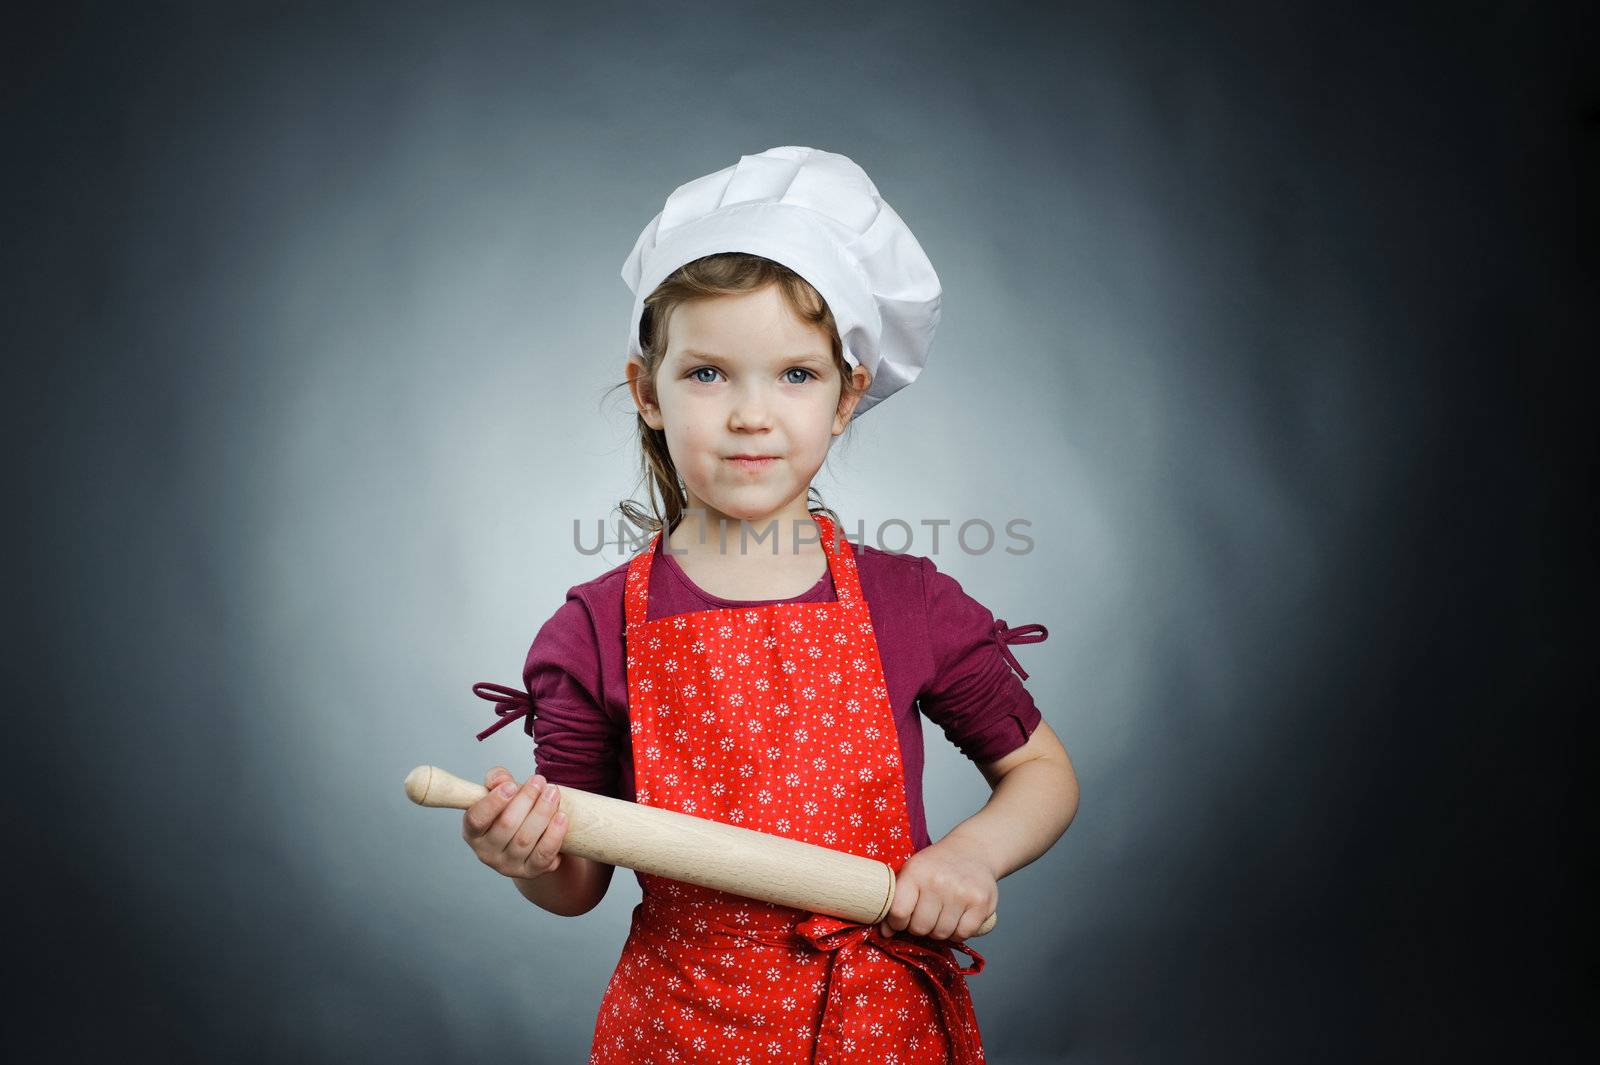 An image of a nice girl in a white hat with a rolling-pin